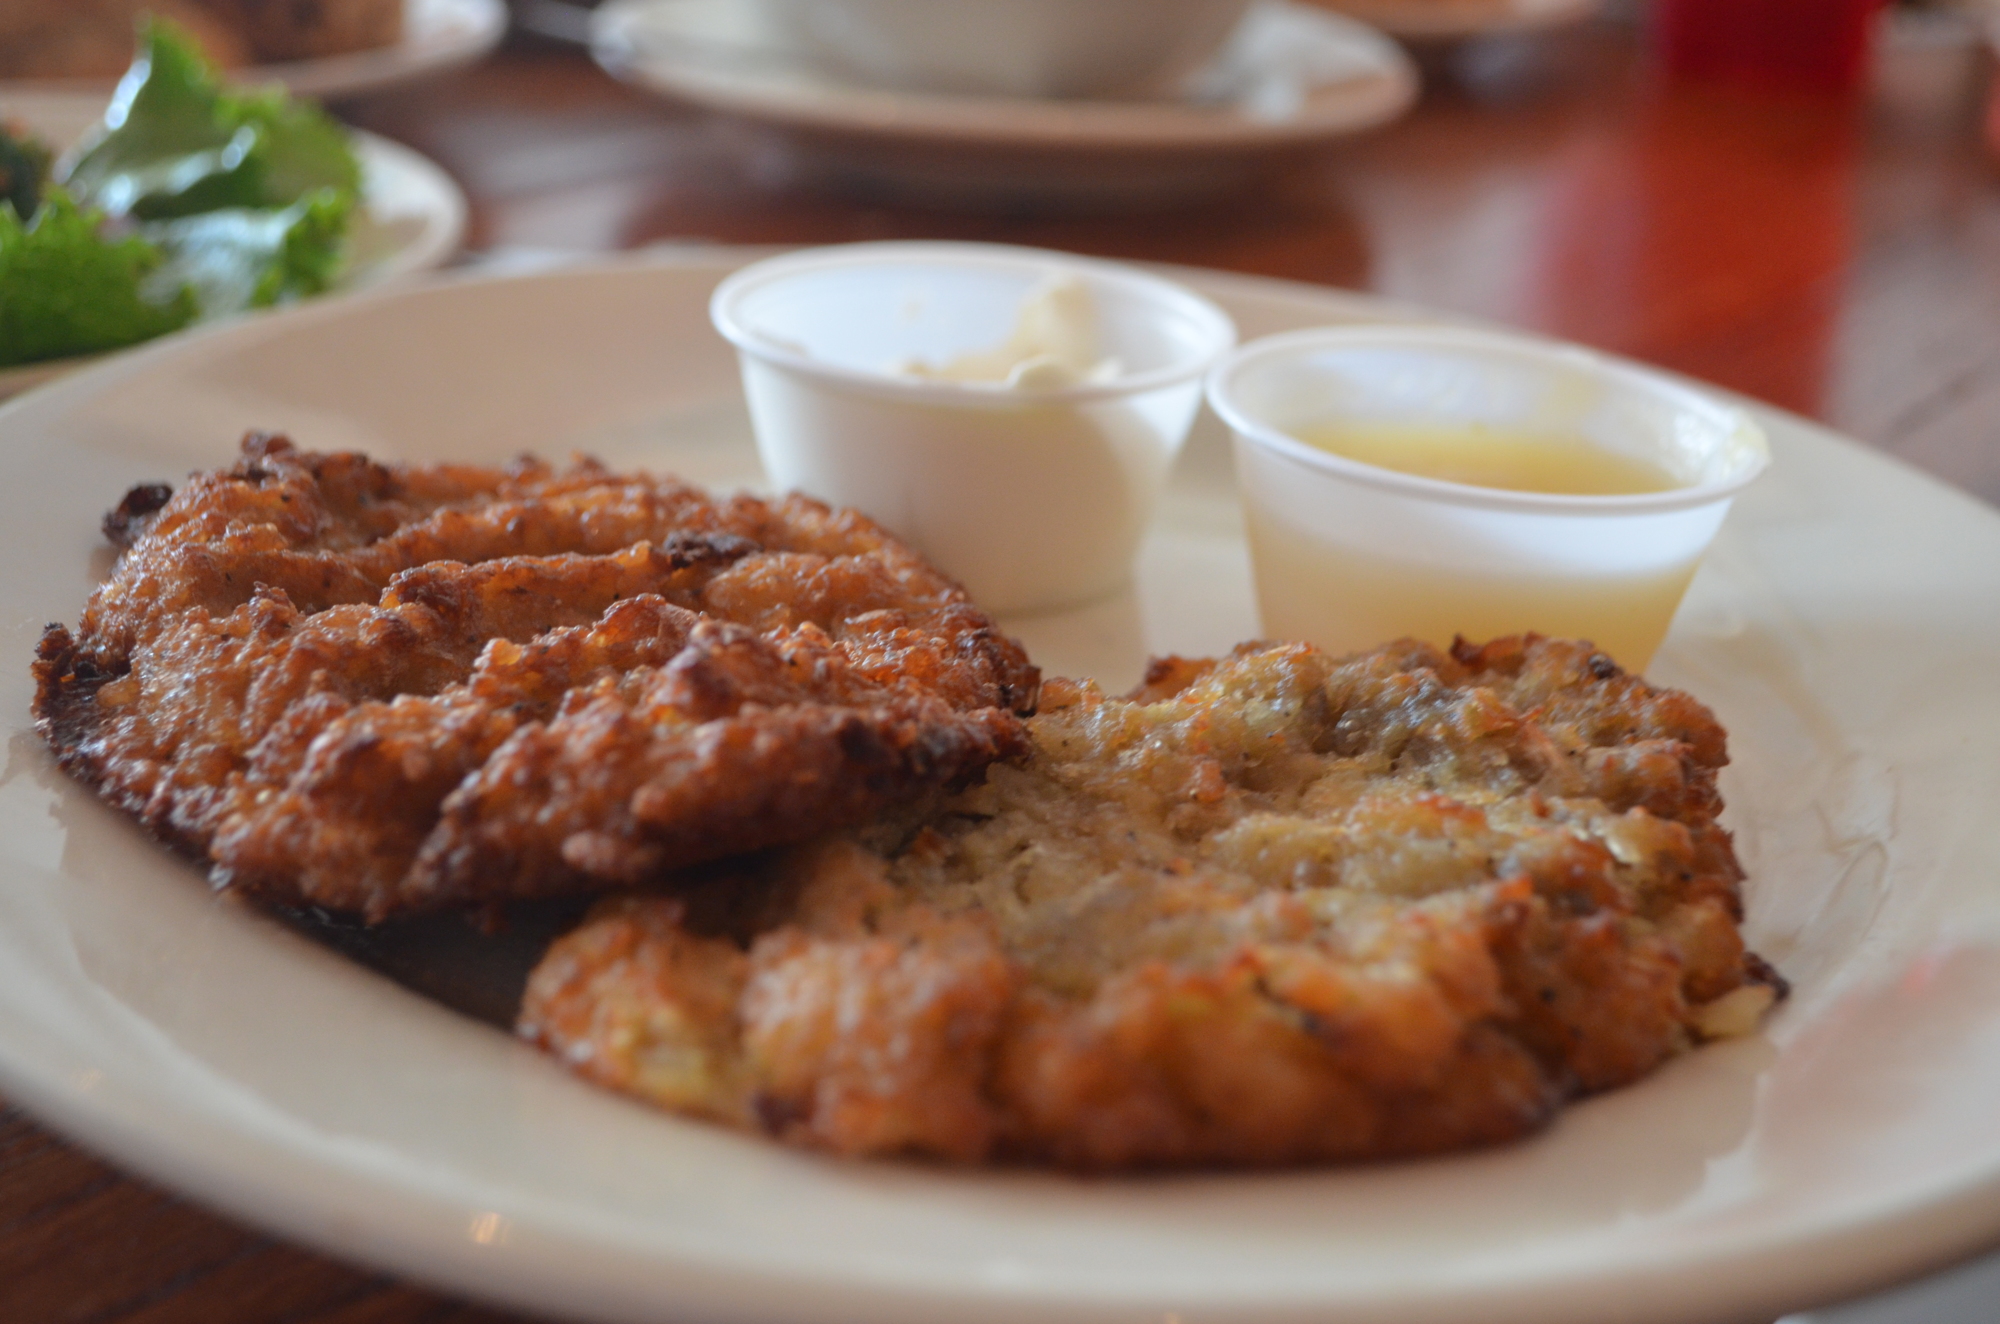 Potato Latkes: Traditionally served during Hanukkah, this favorite snack is essentially potato pancakes that are shallow-fried with a mixture of potatoes, onions, flour and egg.